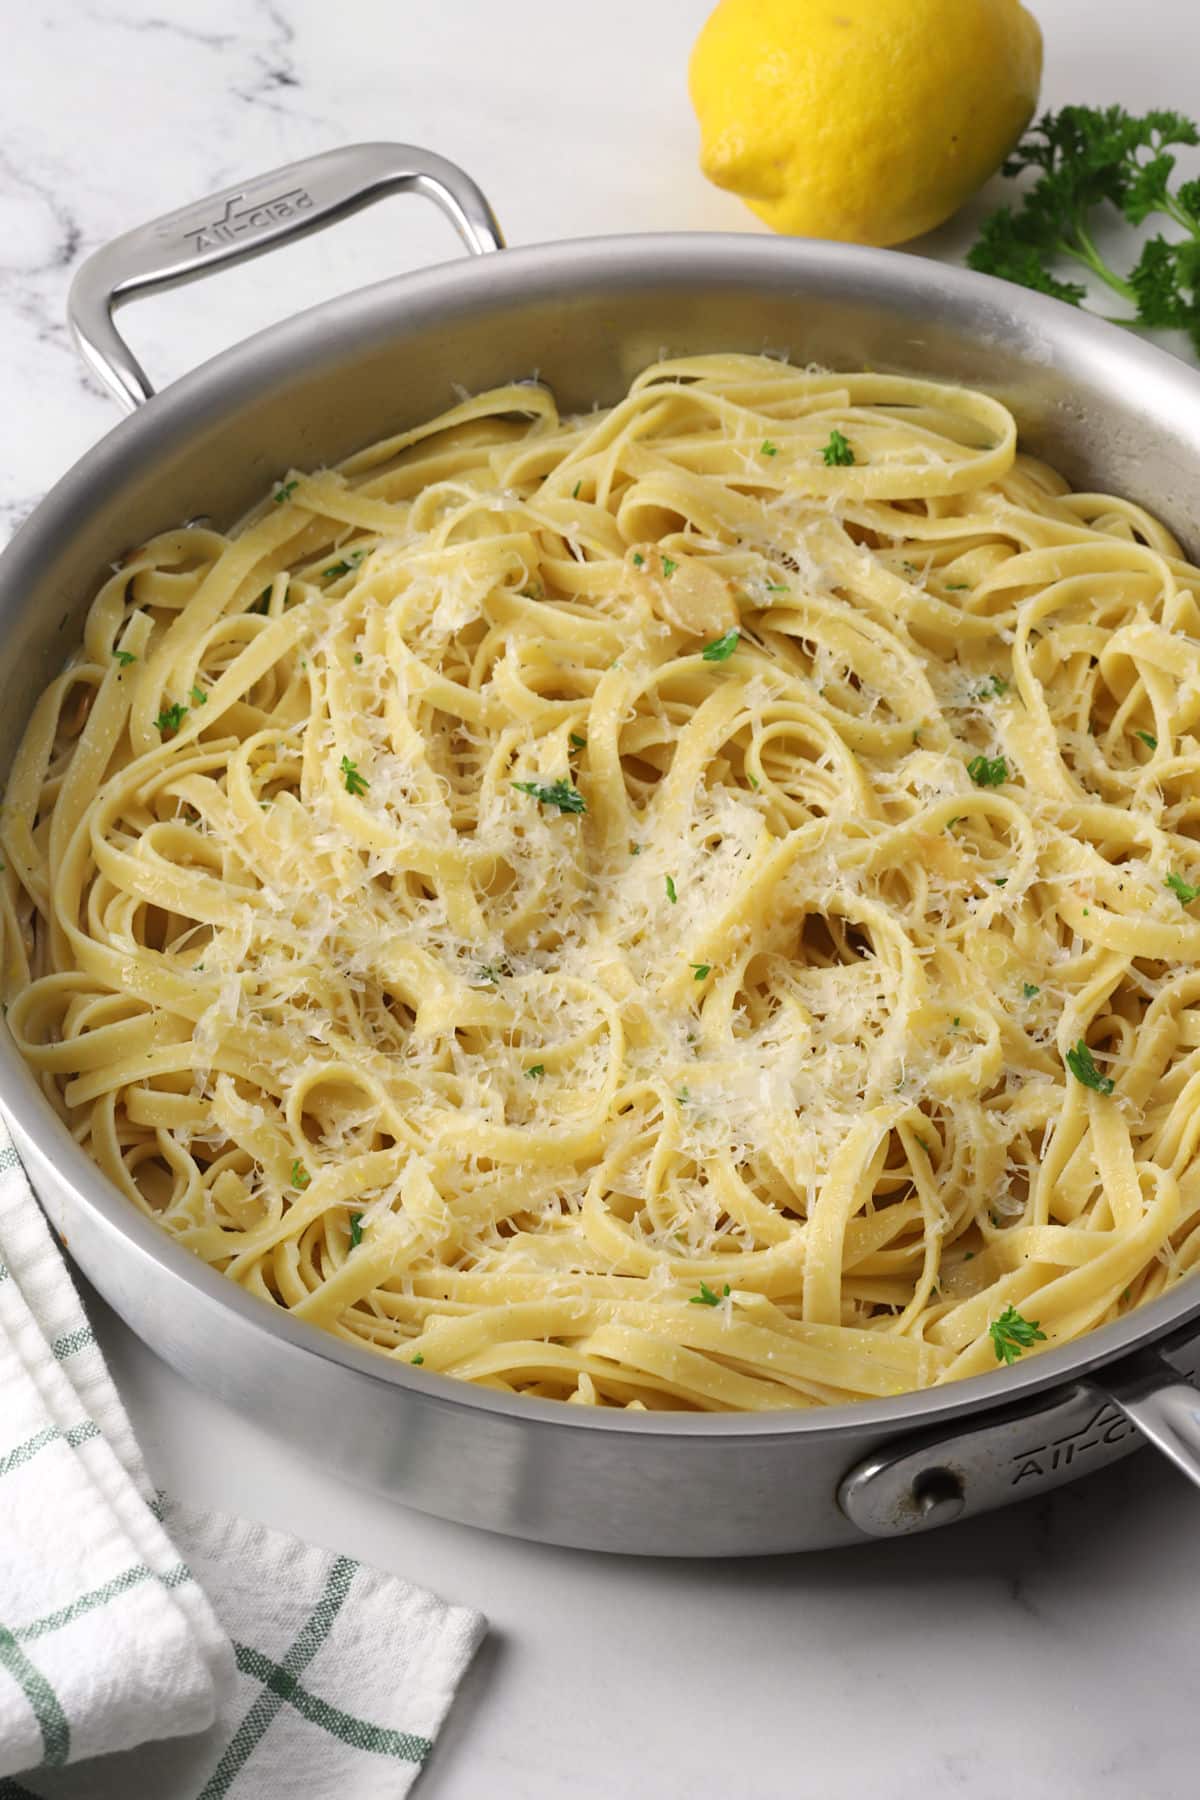 A saute pan filled with lemon garlic pasta topped with parmesan cheese.